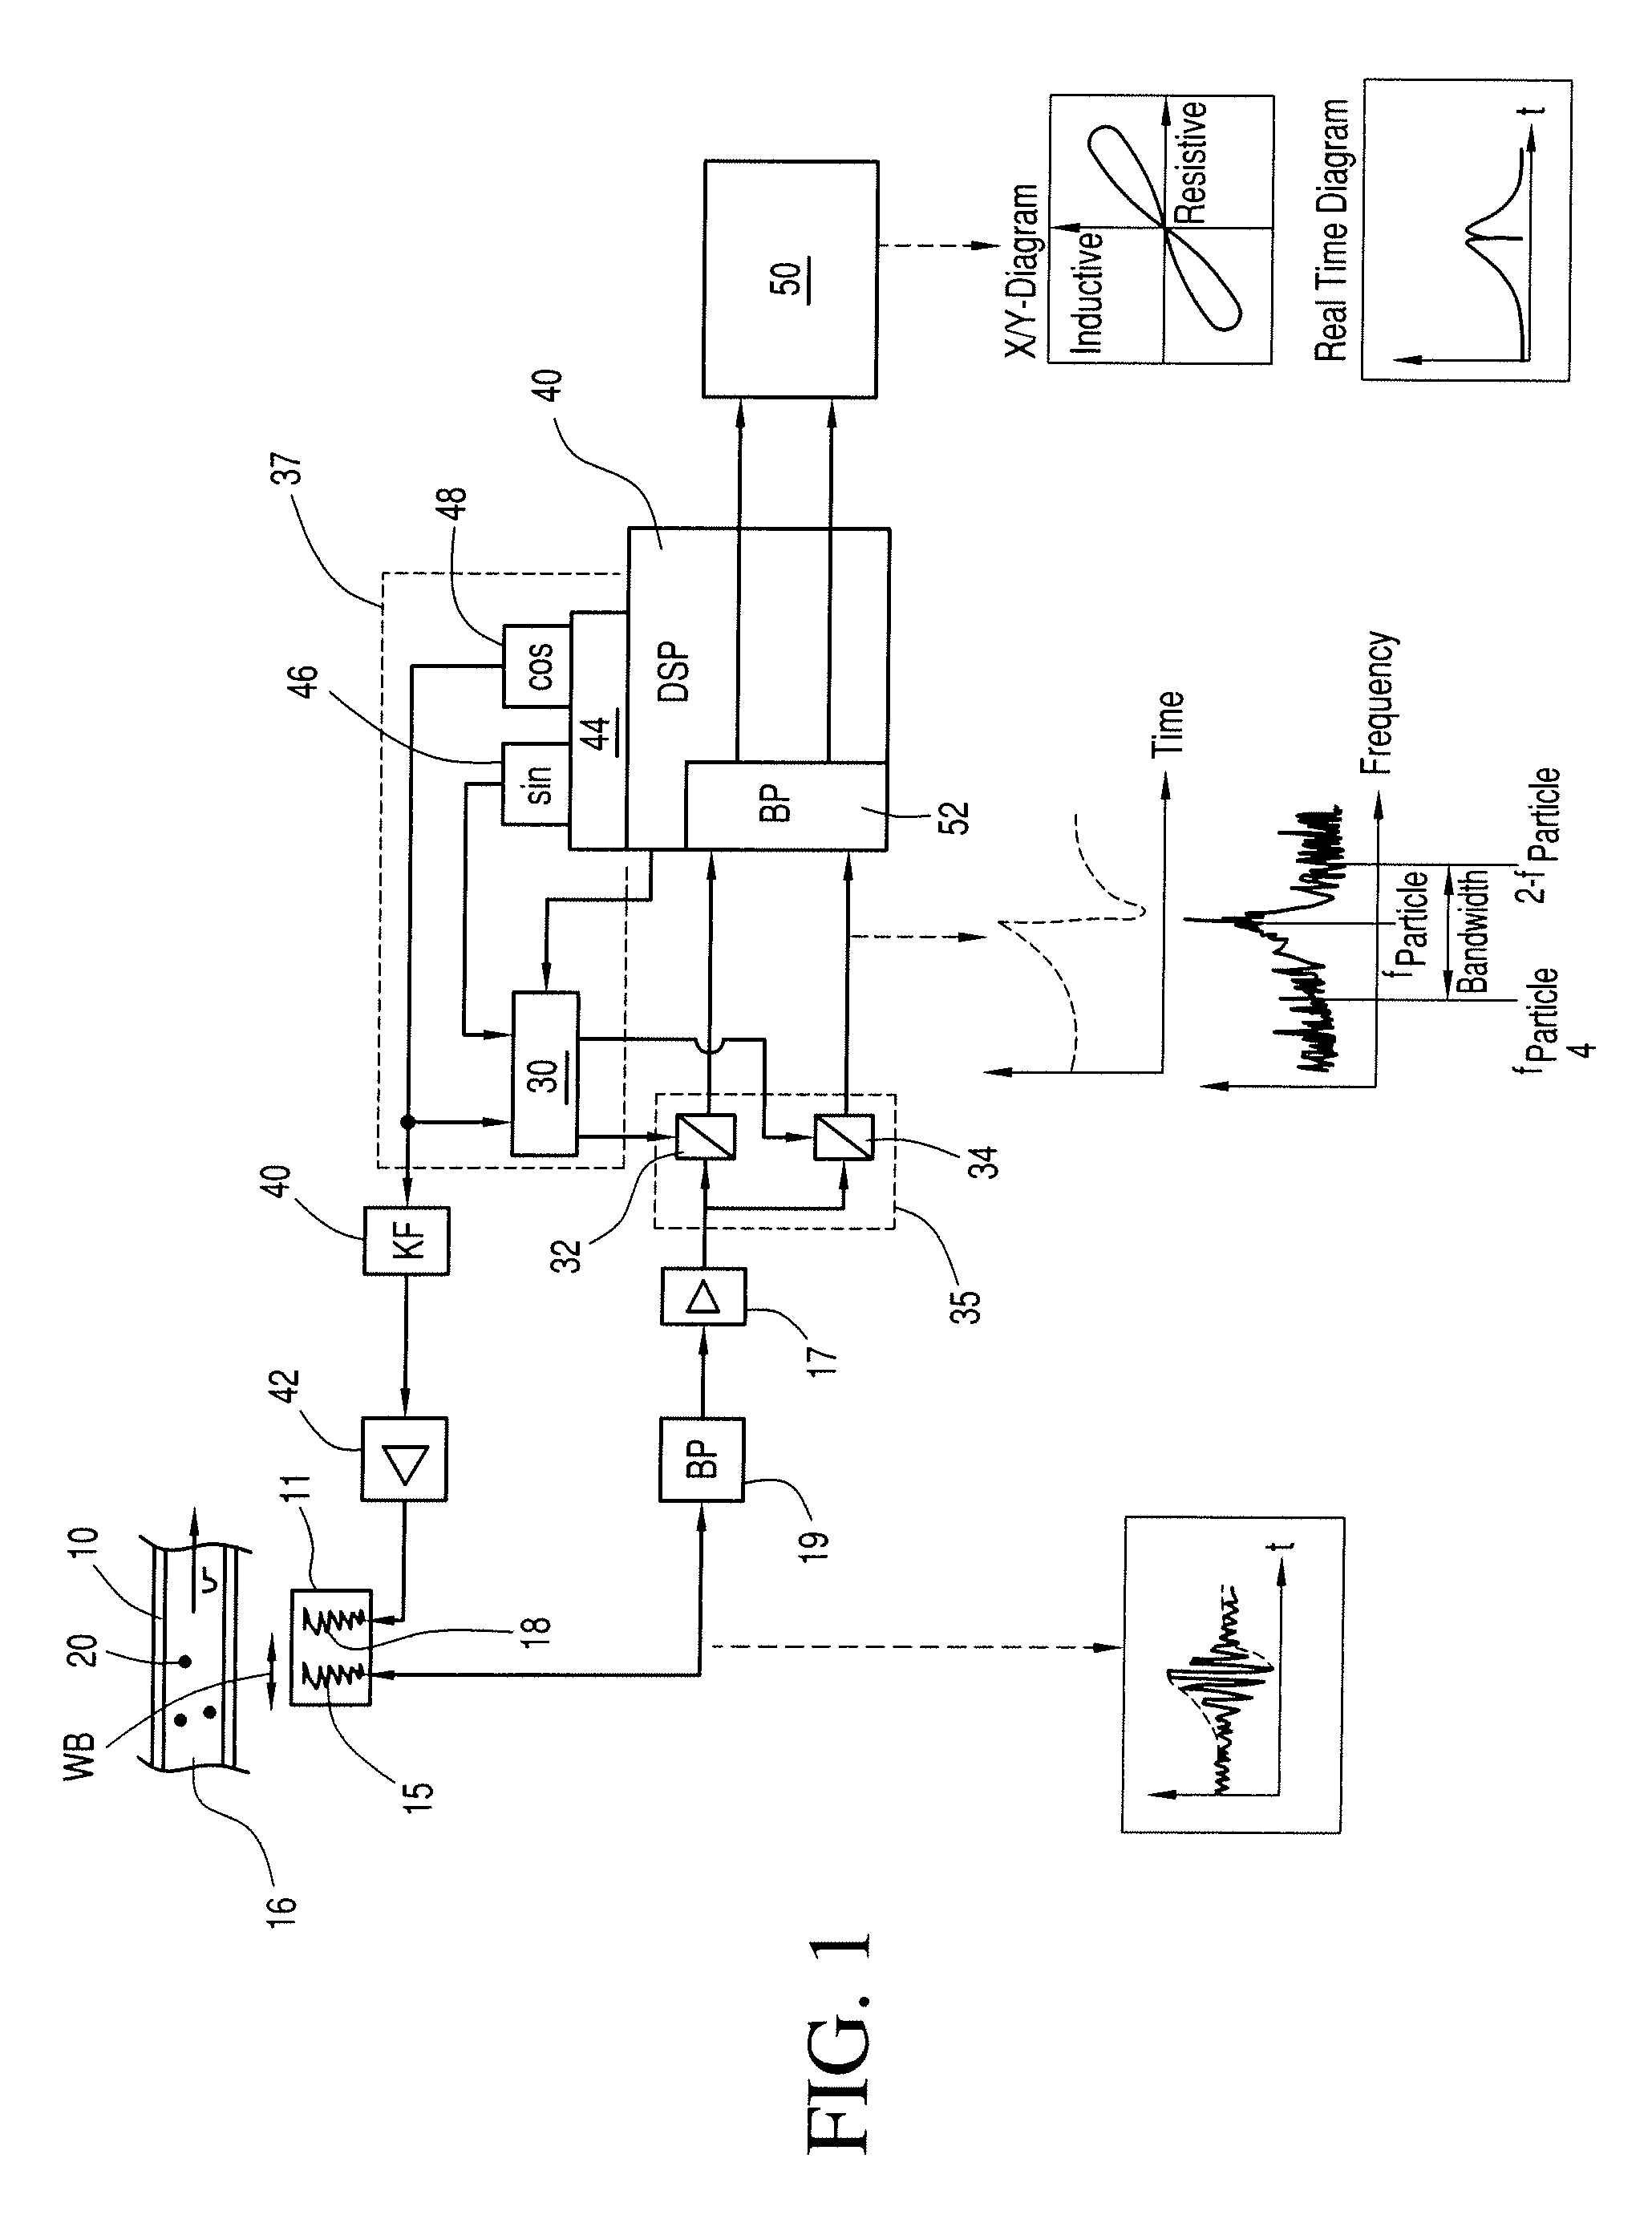 Device and process for detecting particles in a flowing liquid